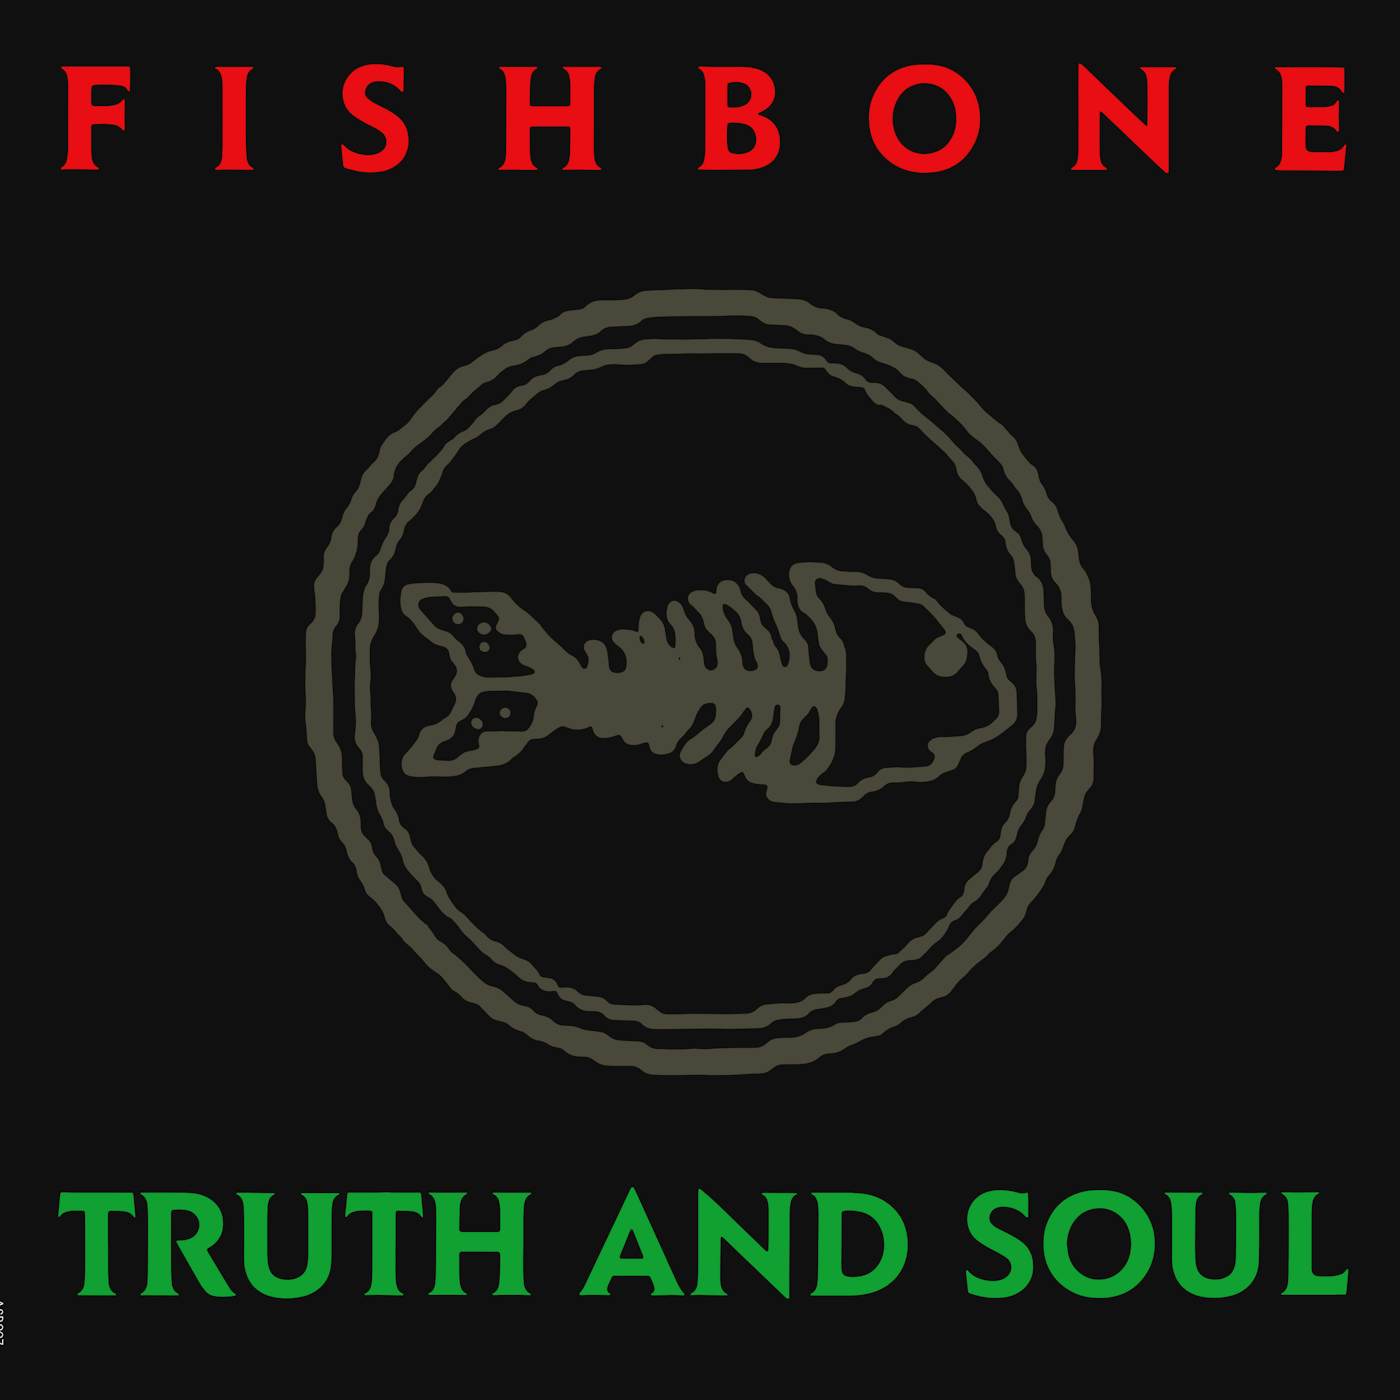 Fishbone Truth And Soul Vinyl Record